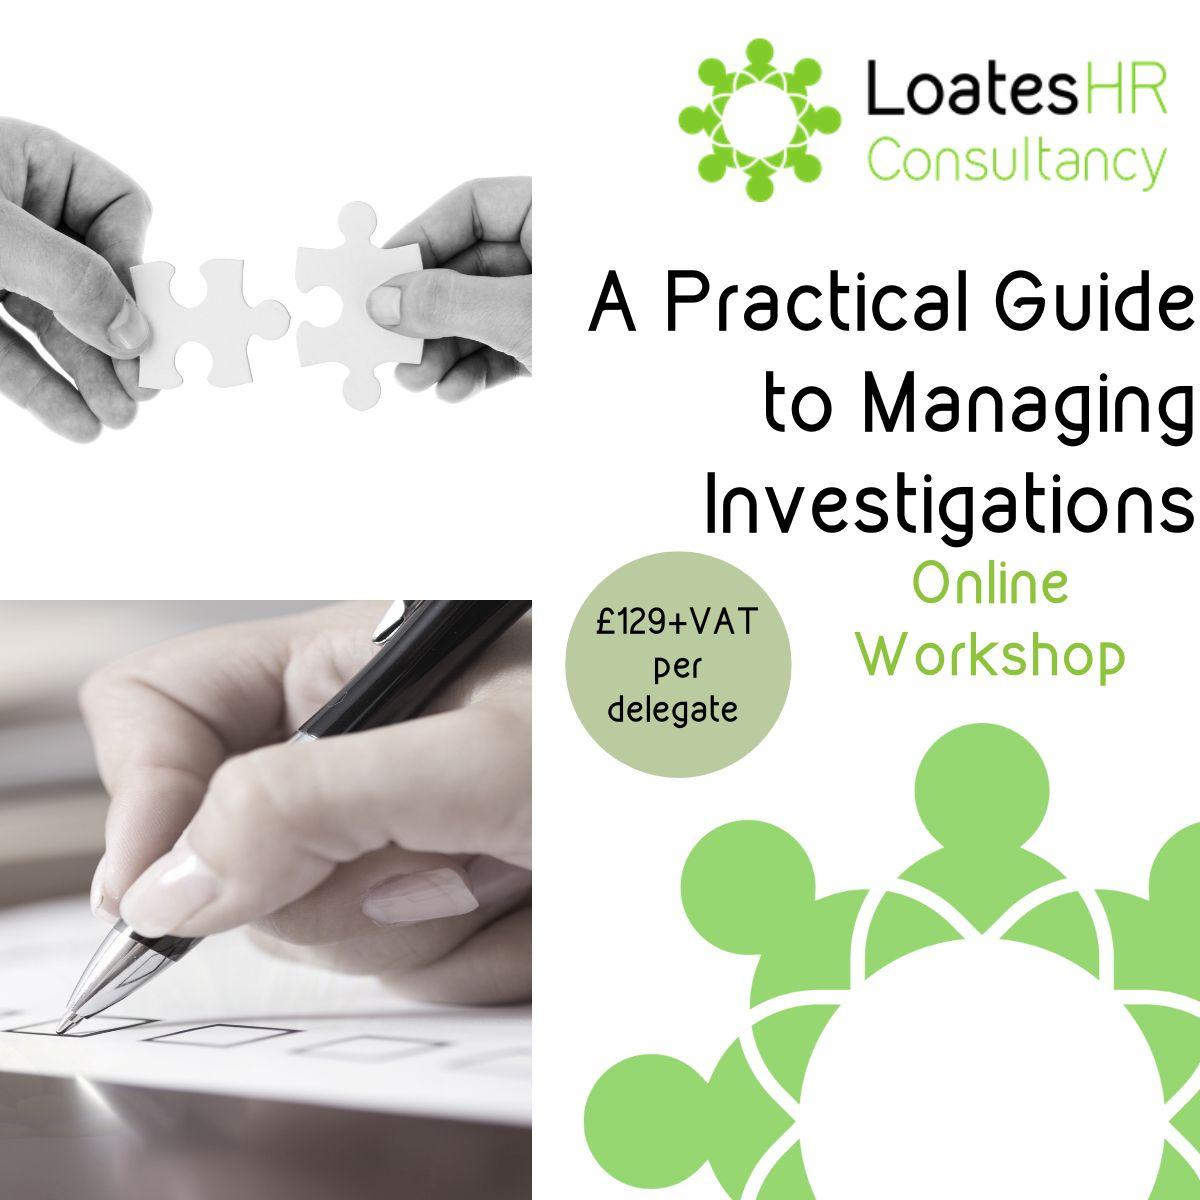 Don't miss out! 🤩 Get ready to manage investigations with confidence with our online training course 'A Practical Guide to Managing Investigations' on Wed 12 Apr 2023. #investigations #training #HR #management #onlinelearning 🤓 bit.ly/3IYZayY